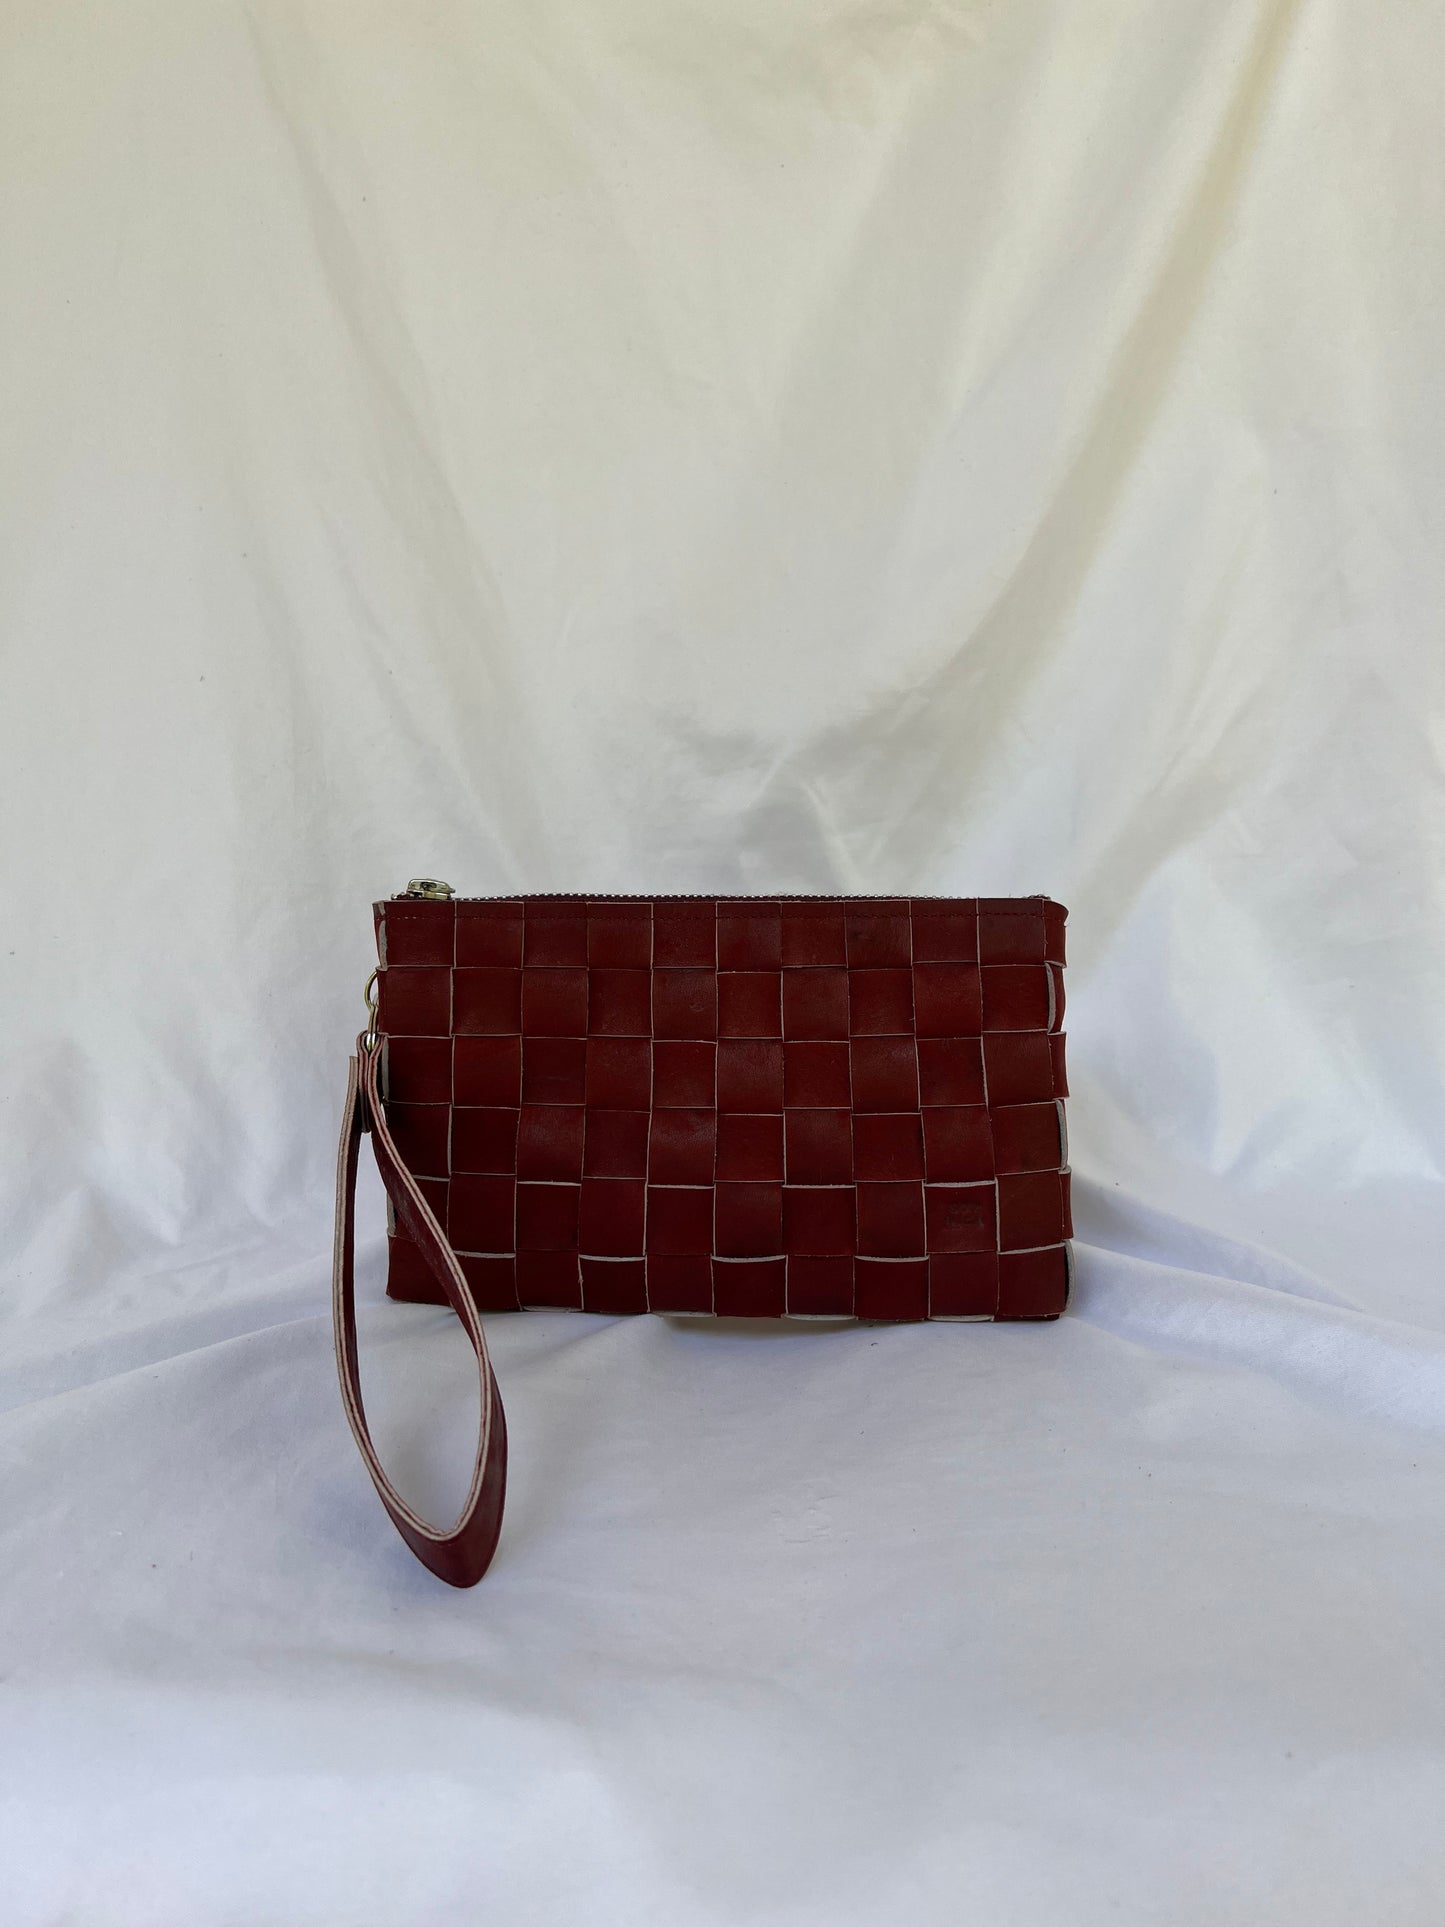 No. 148 Weaved clutch with strap